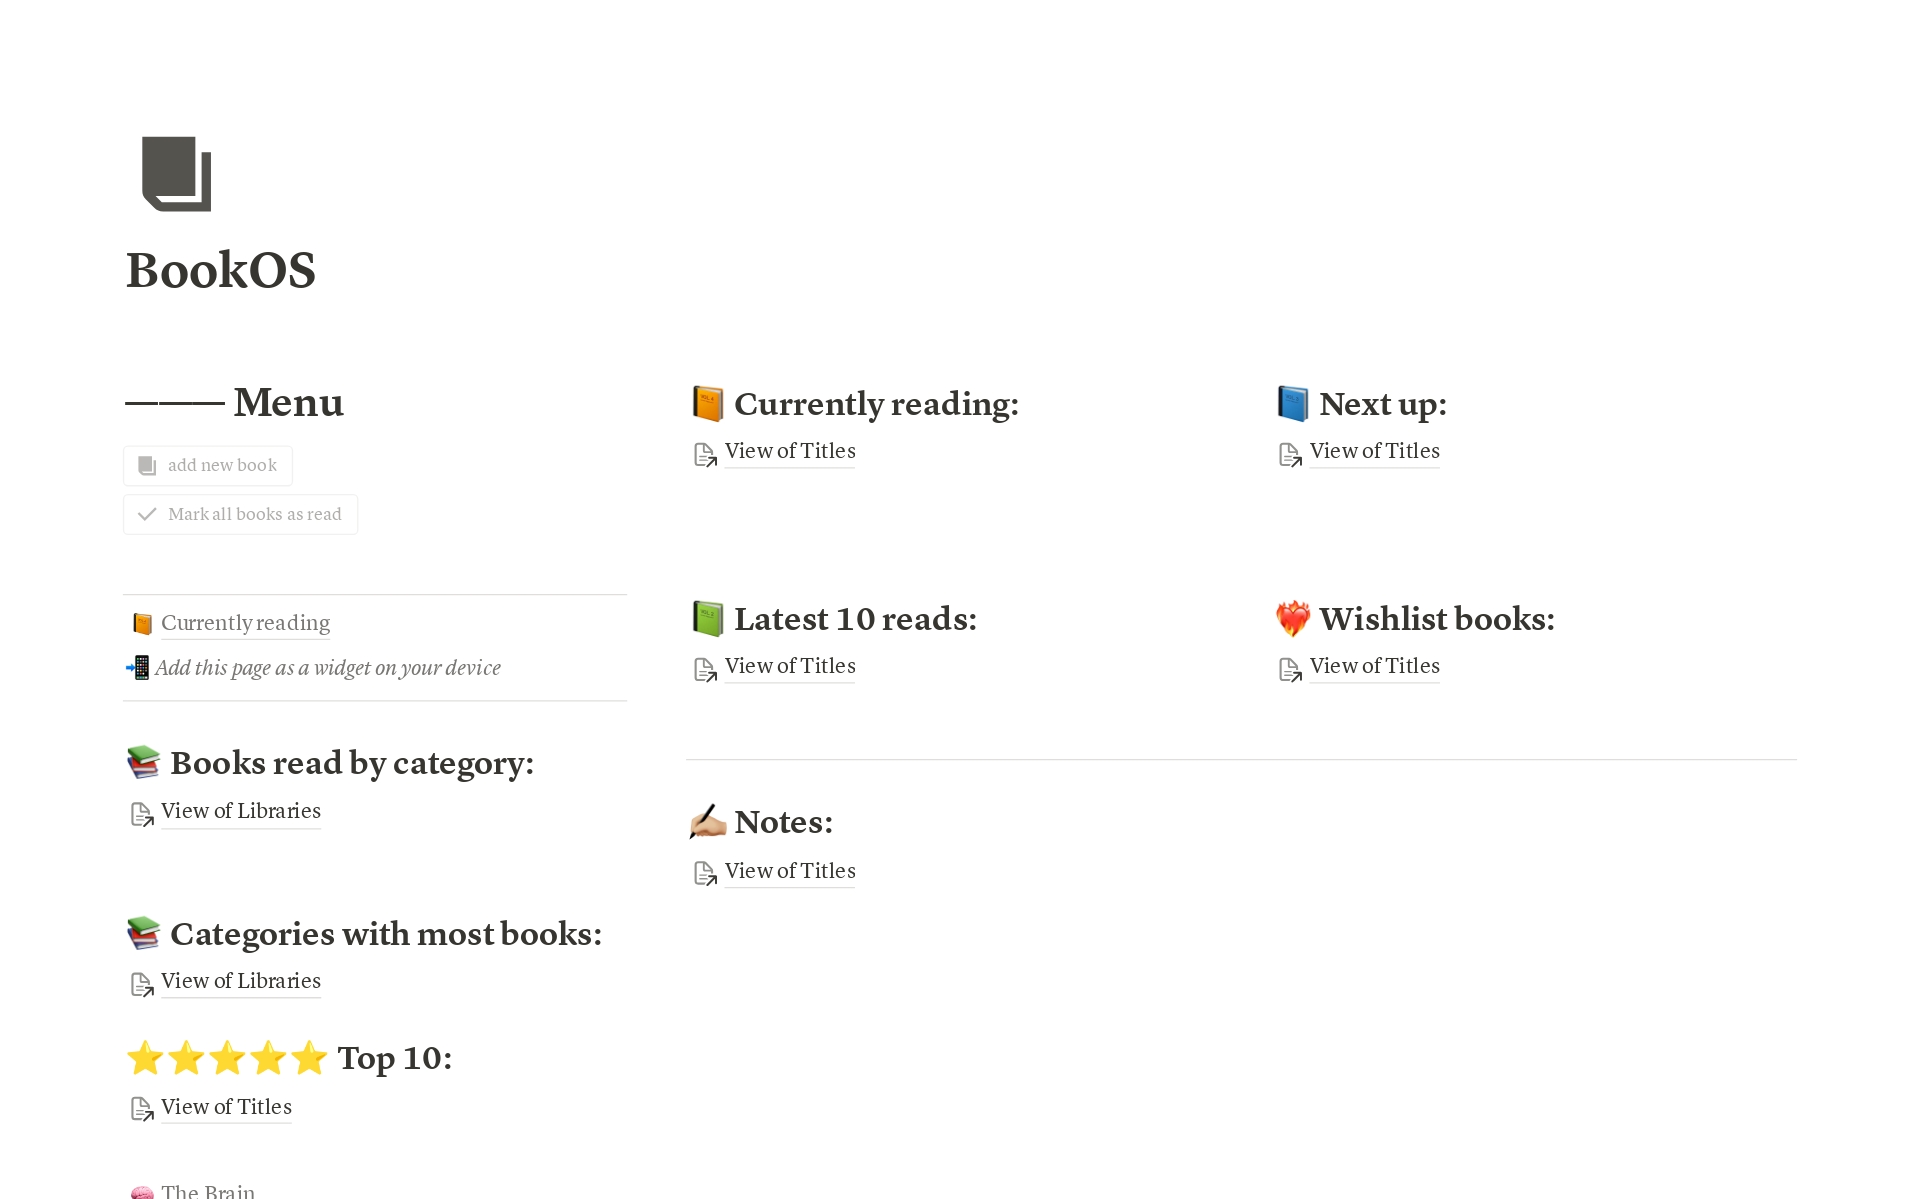 Organise your reading list by categories, authors, rating and easily take notes.